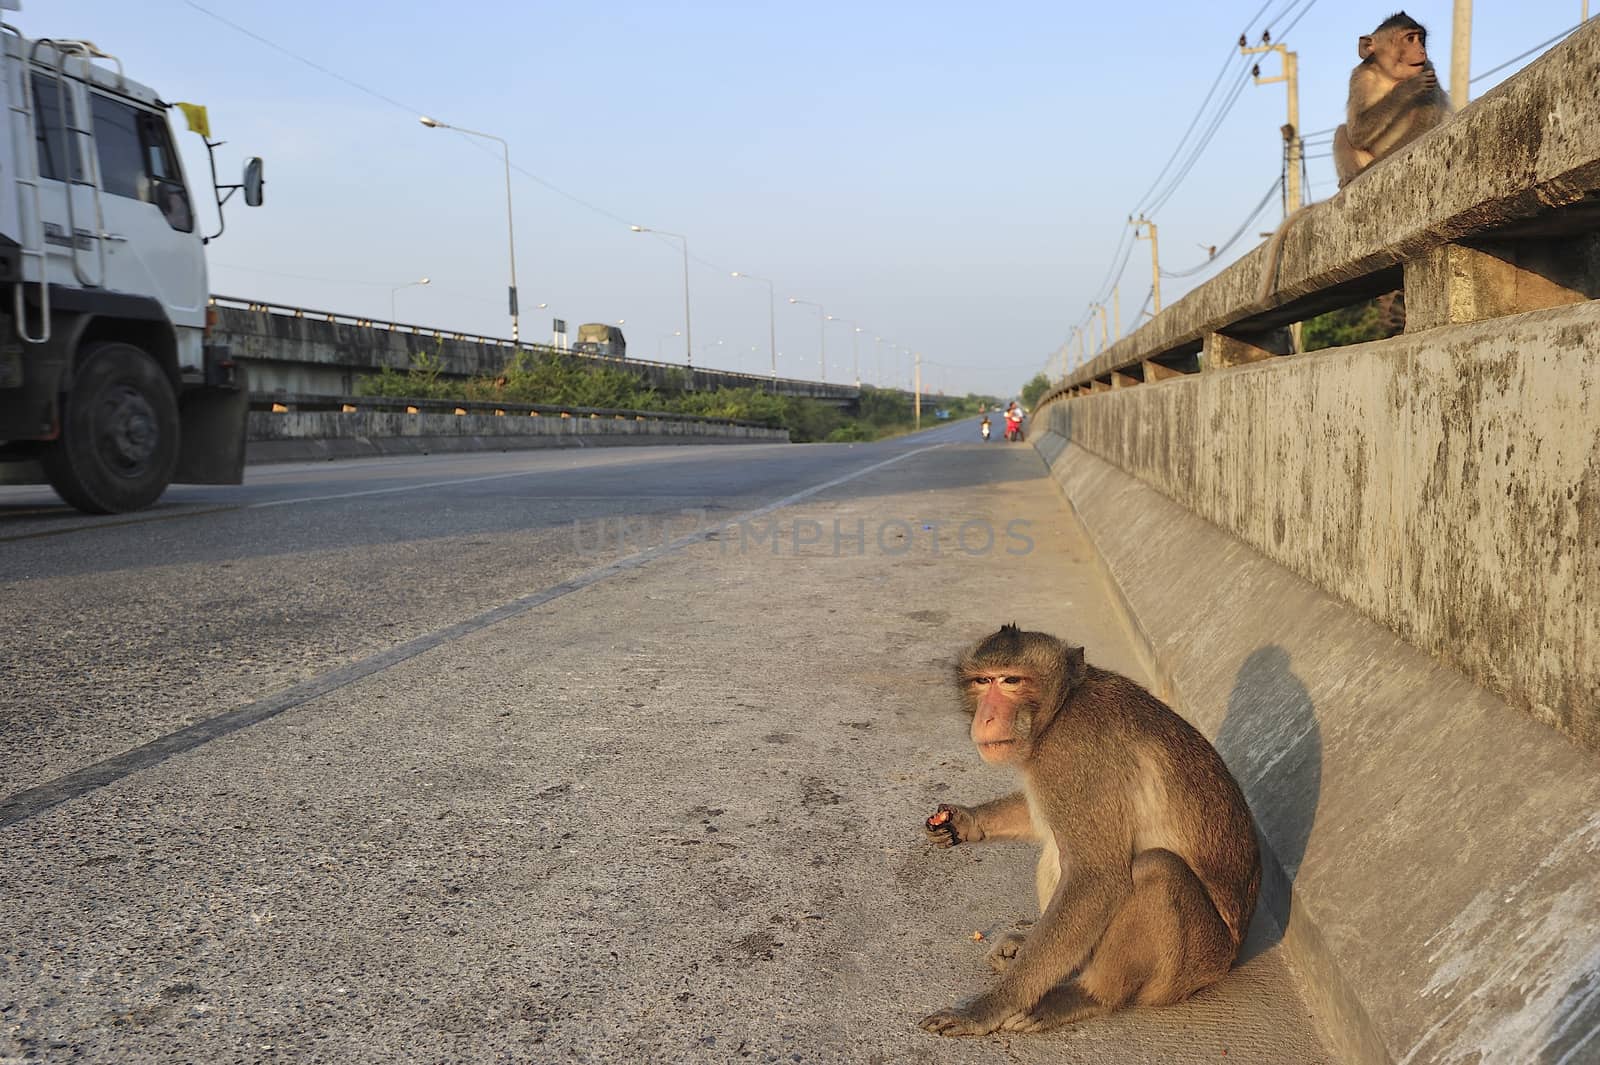 Wild monkeys on the road by think4photop